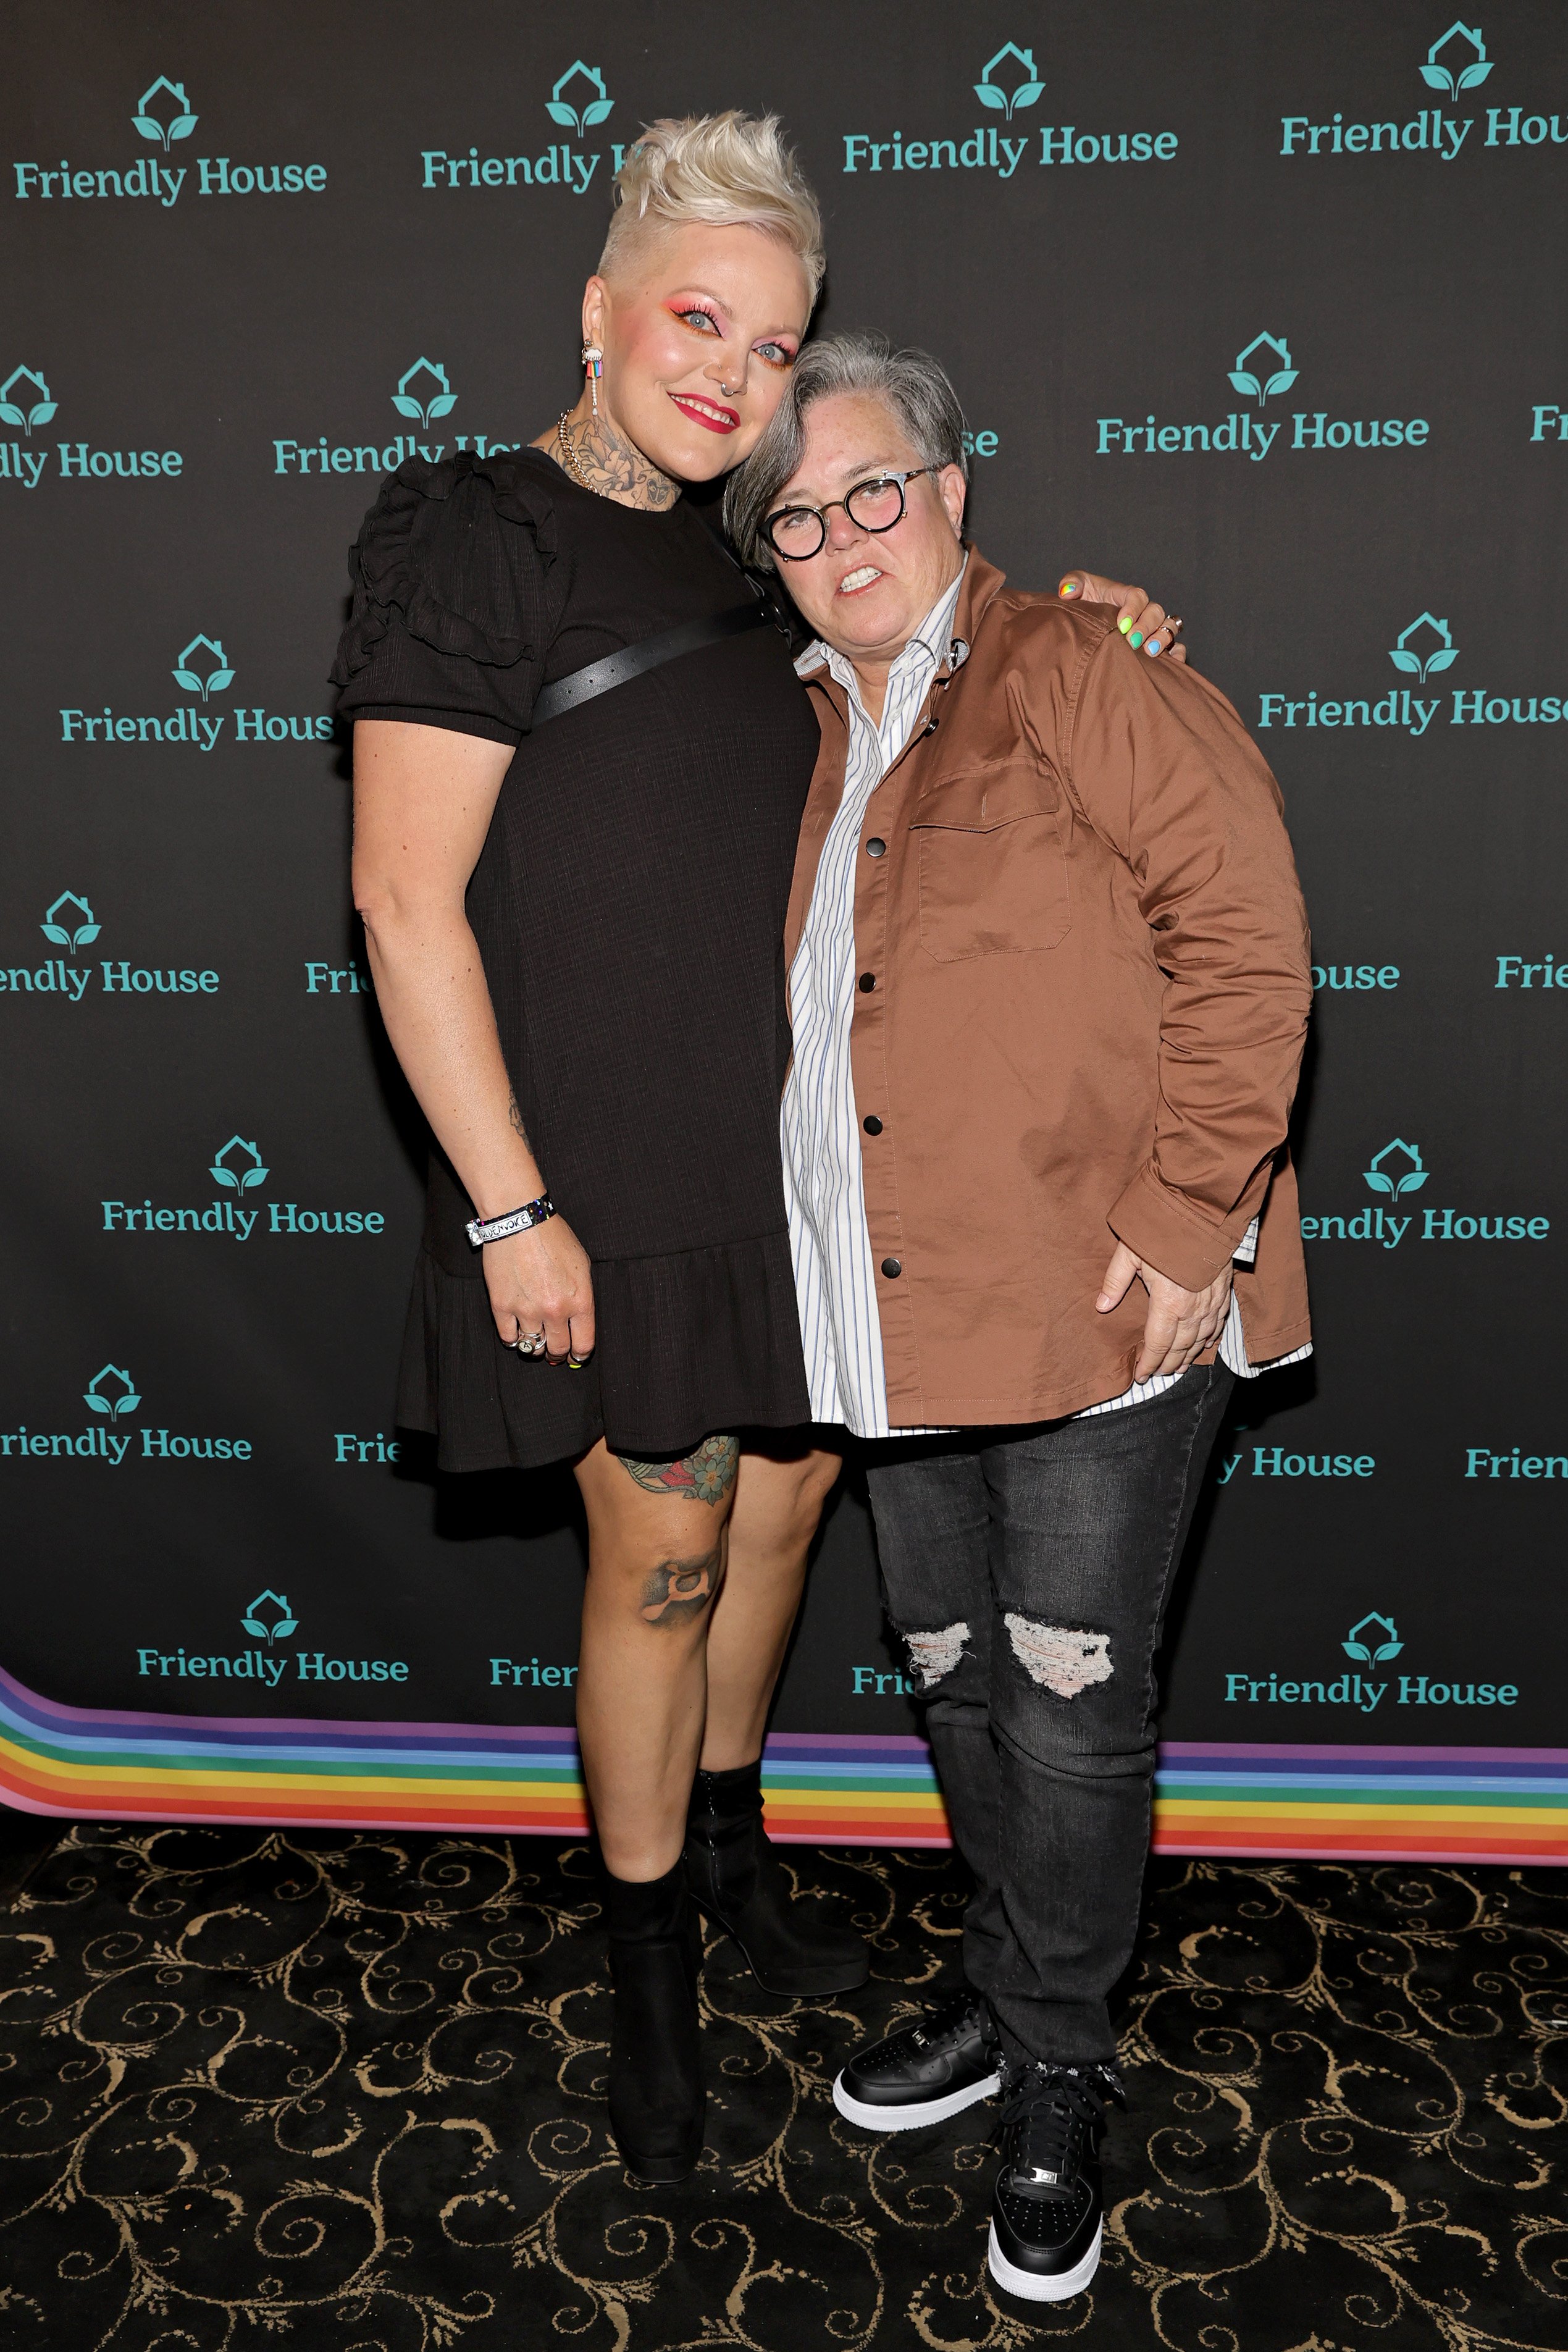 Aimee Hauer and Rosie O'Donnell at FRIENDLY HOUSE LA Comedy Benefit at The Fonda Theatre in Los Angeles, California on July 16, 2022 | Source: Getty Images